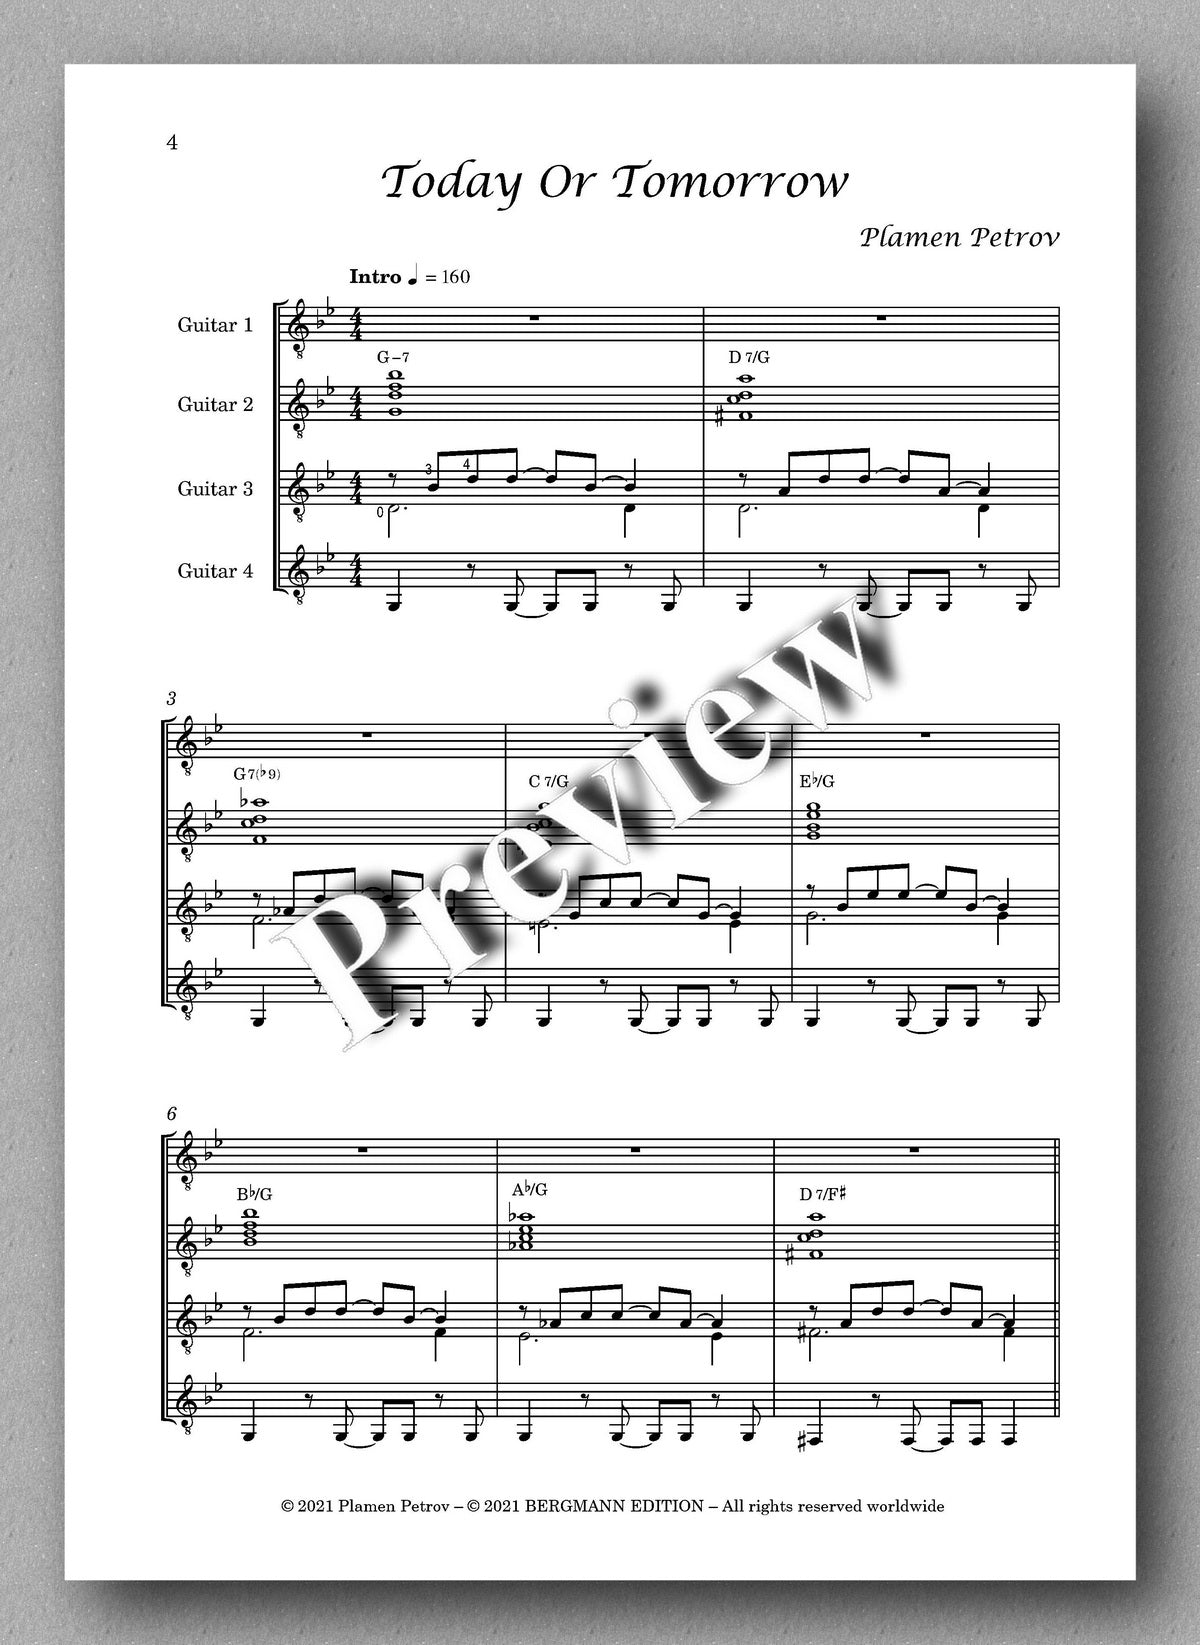 Petrov, Today Or Tomorrow - music score 1